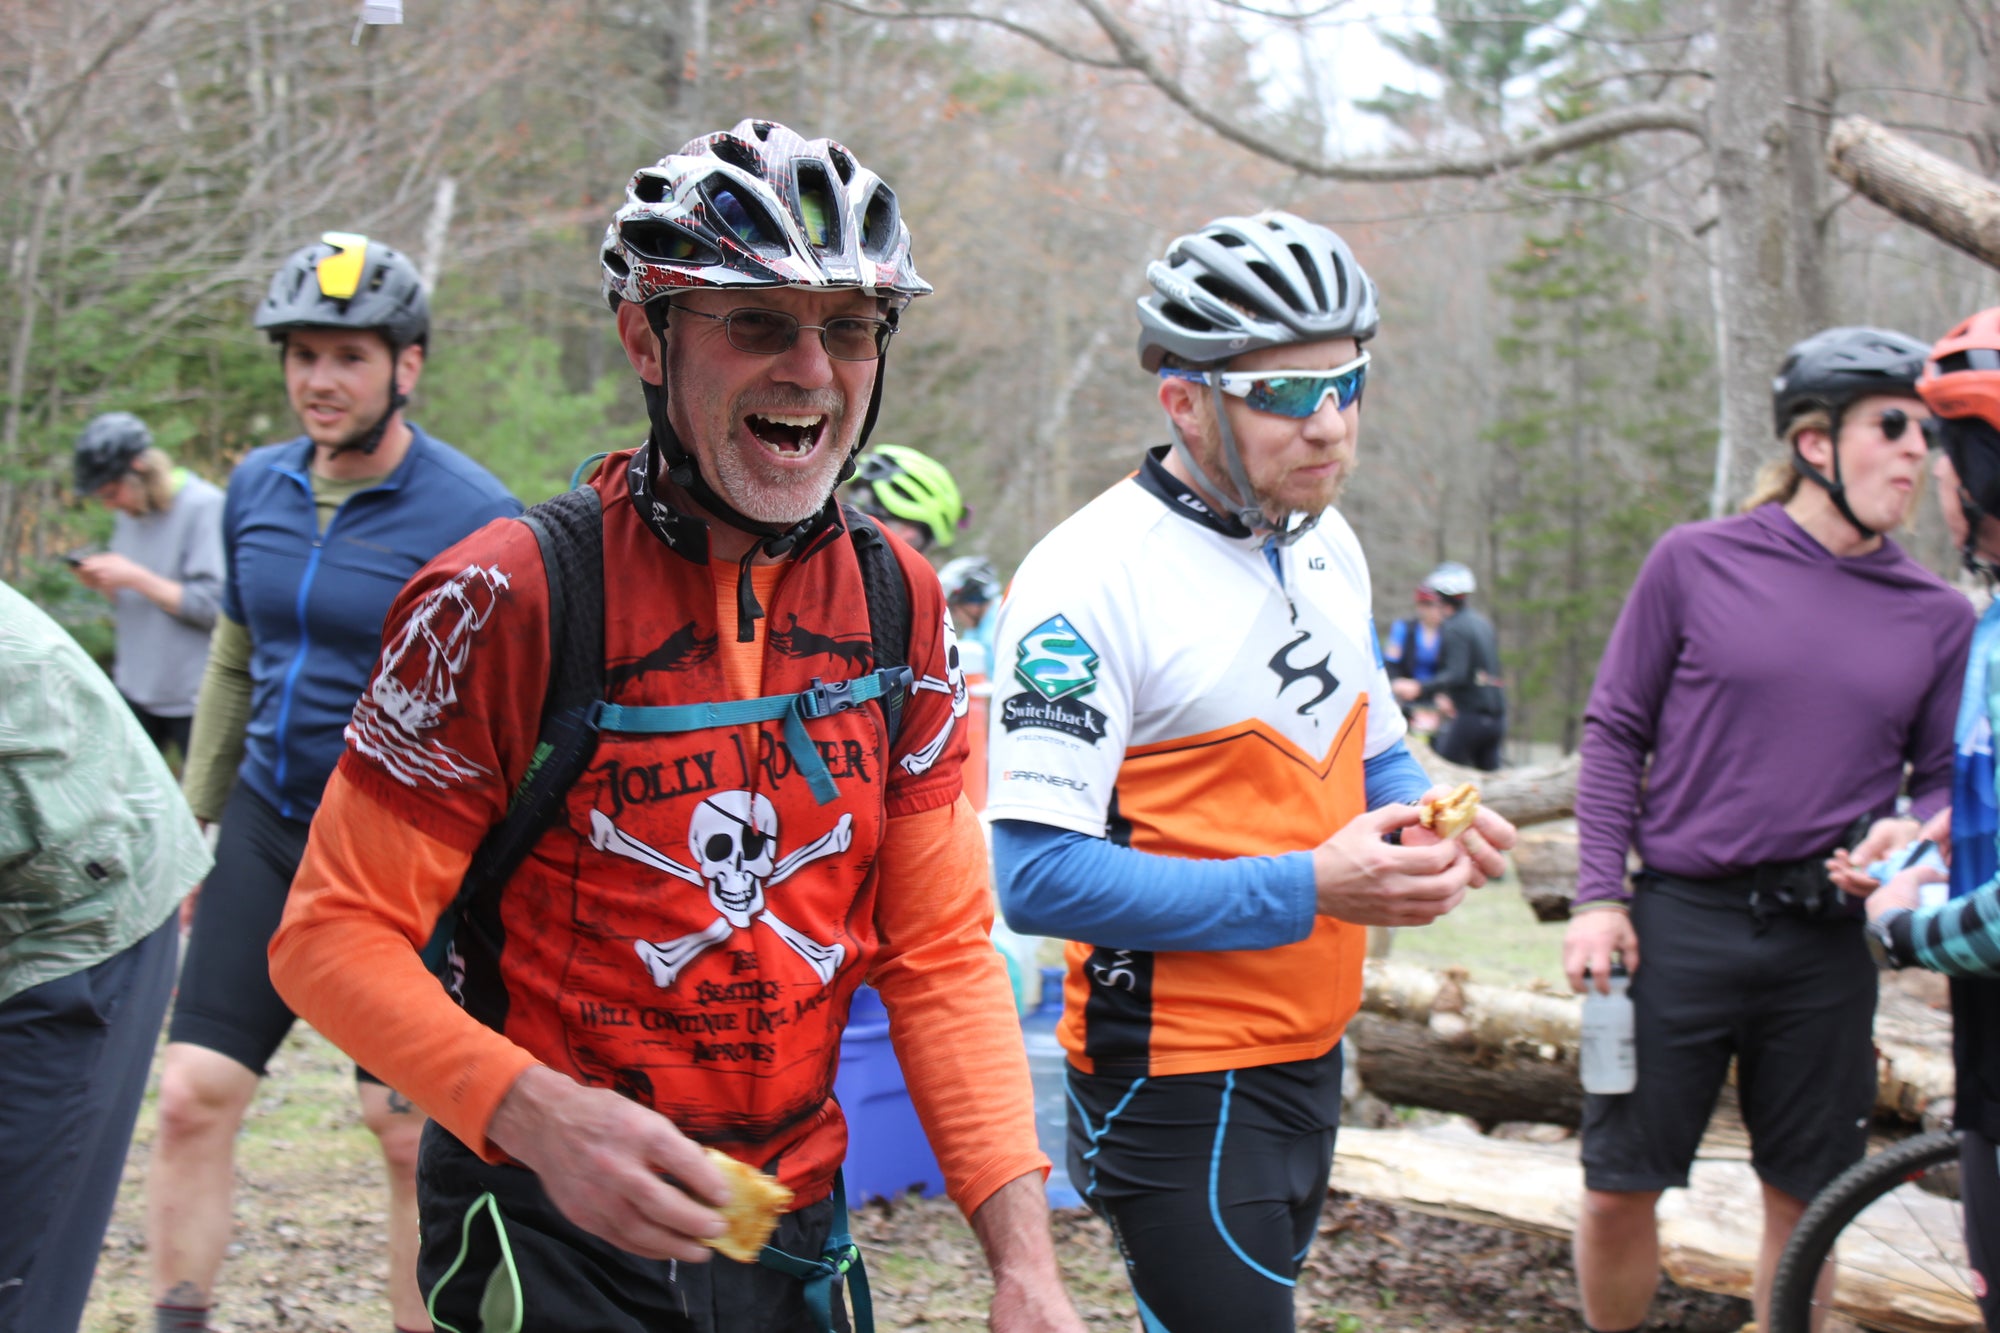 A cyclist in an orange jersey with a skull and crossbones on it